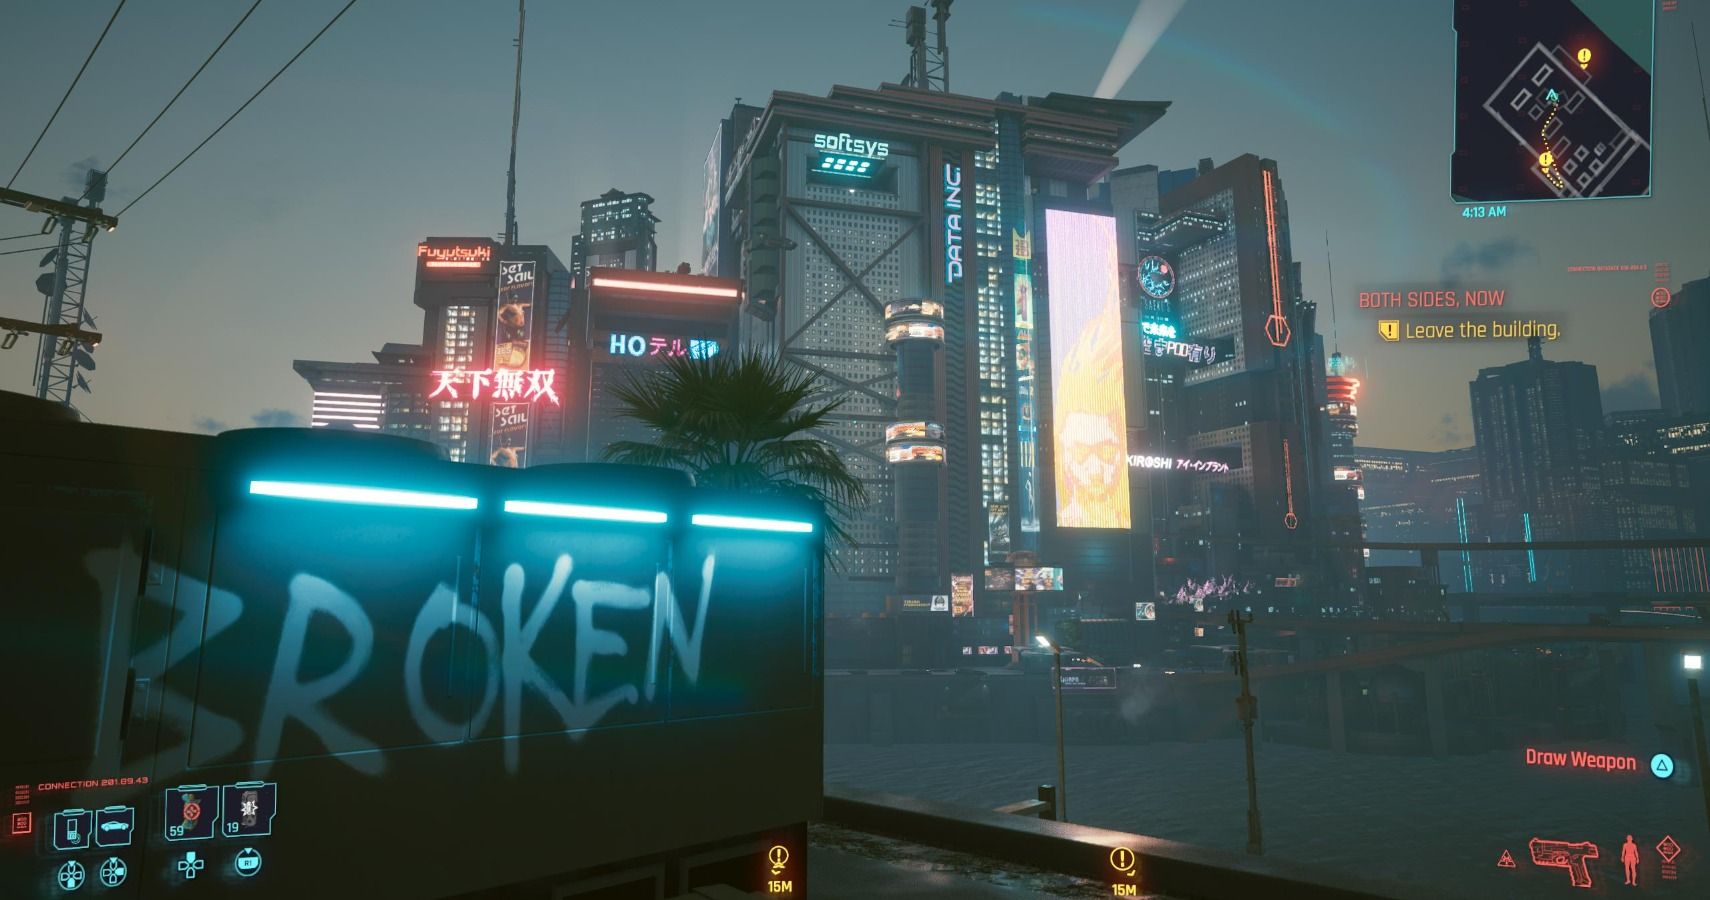 Cyberpunk 2077 Isn't The First Game To Launch In A Broken State, But It's The Worst Offender Yet